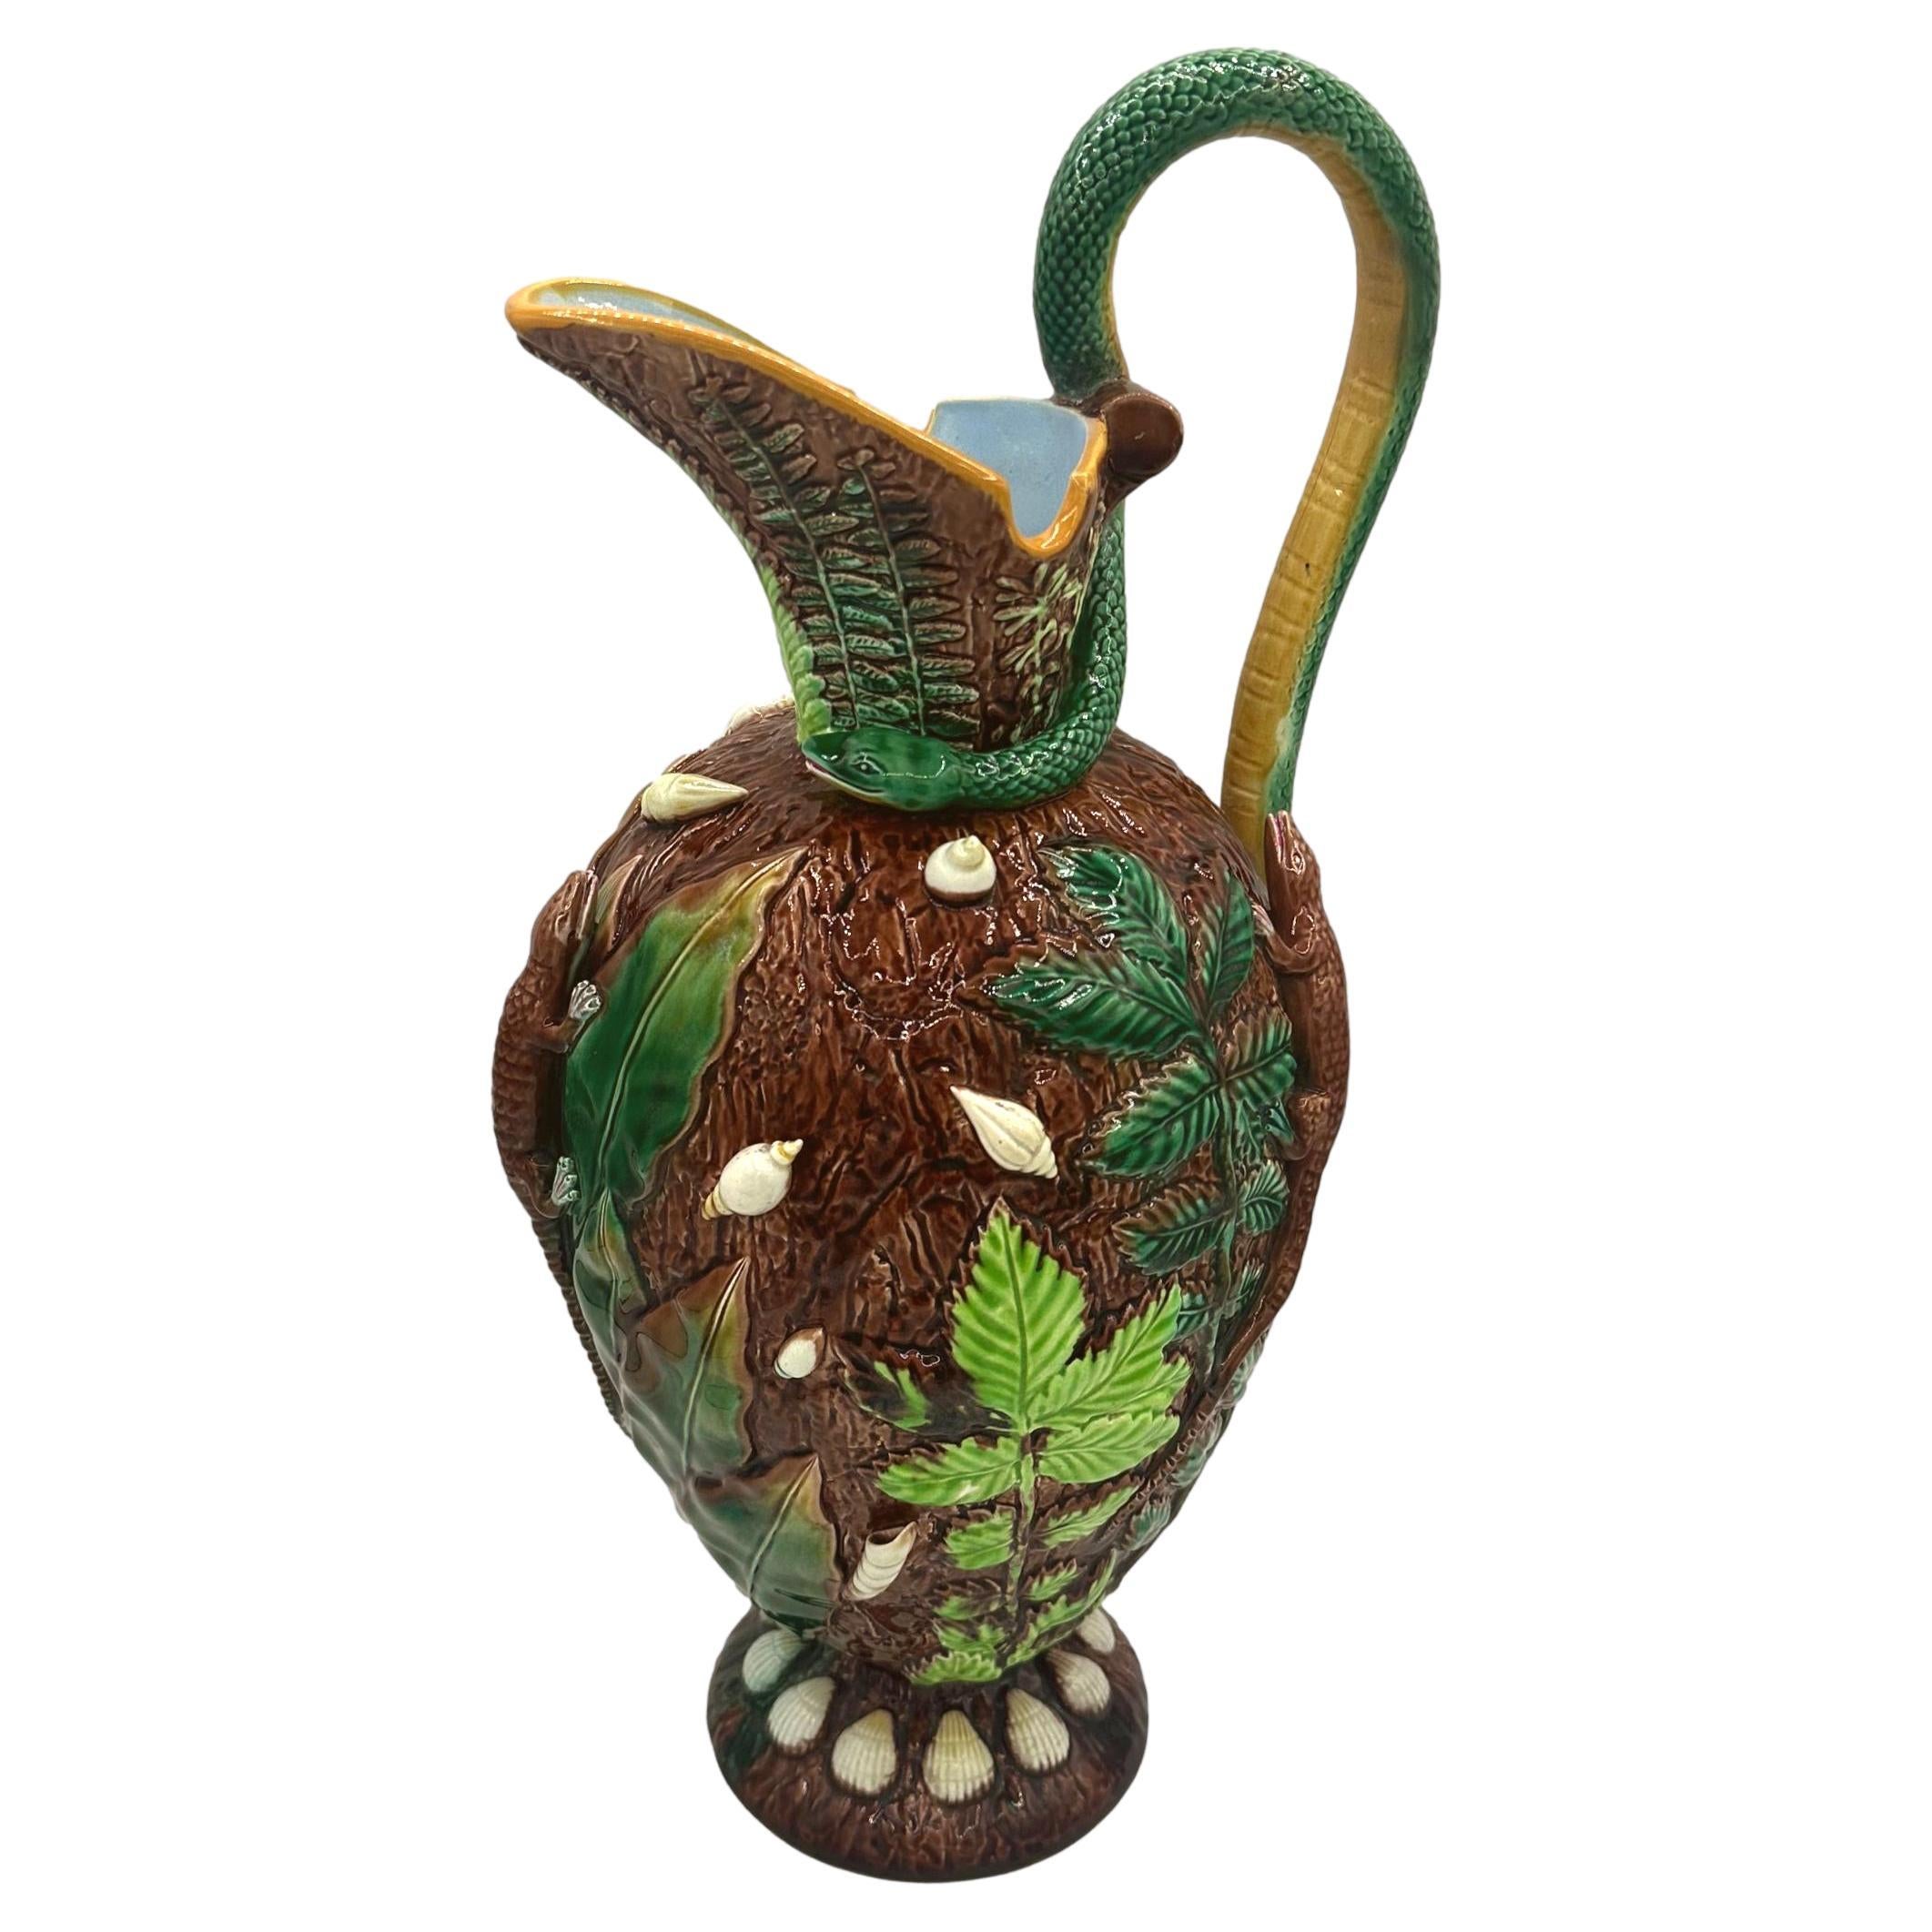 Victorian A George Jones Majolica 'Palissy Vase' with Snake Handle, English, ca. 1870 For Sale